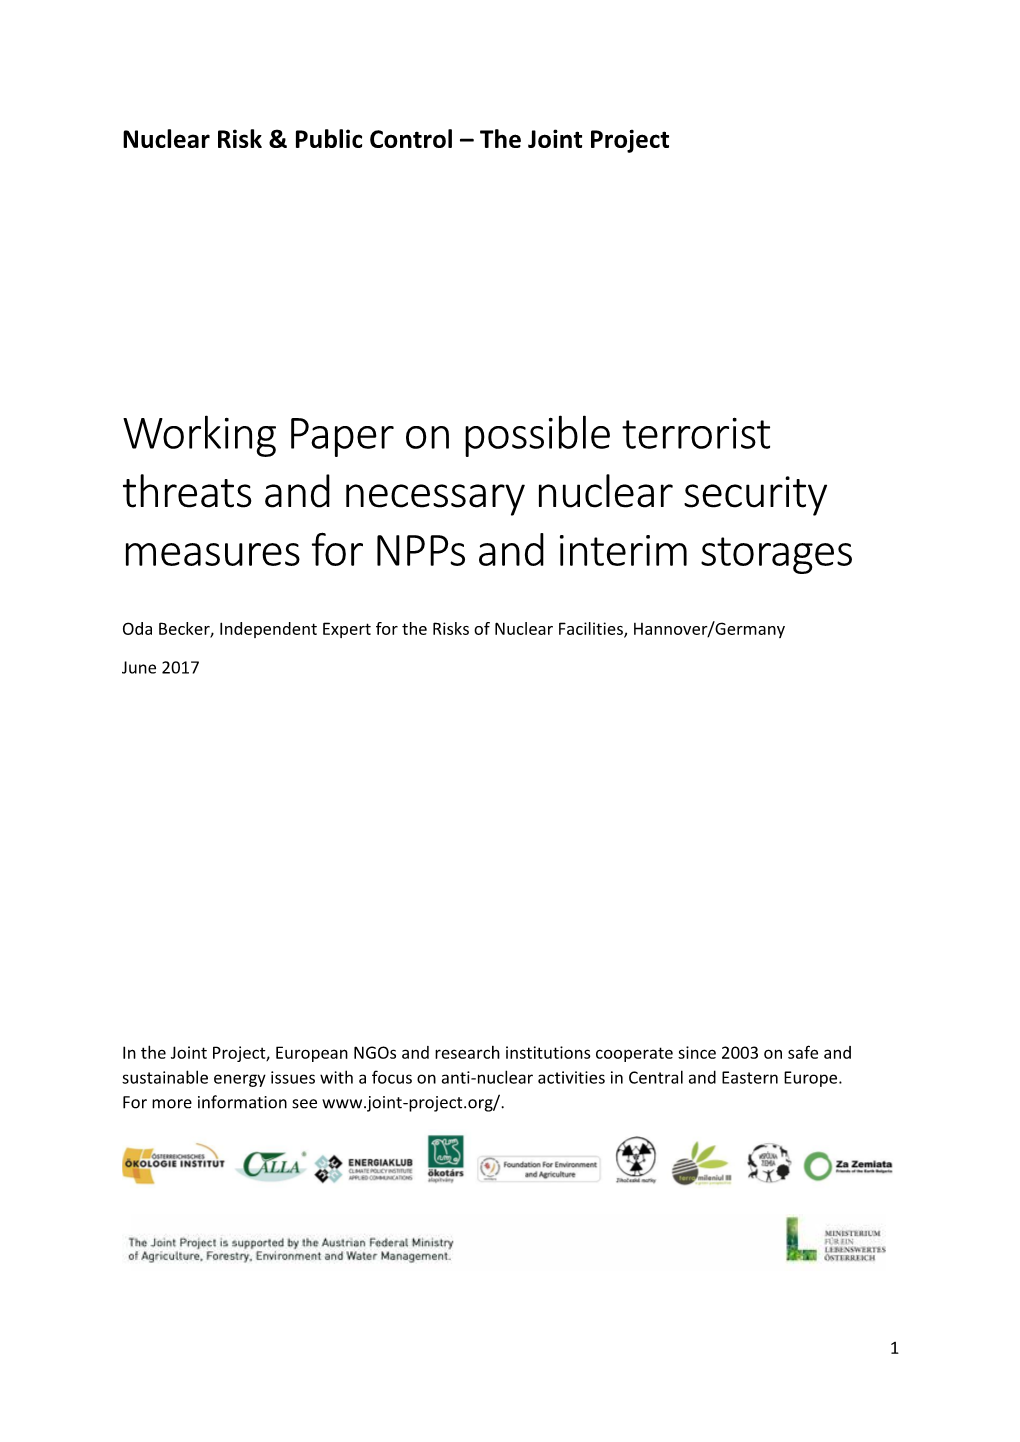 Working Paper on Possible Terrorist Threats and Necessary Nuclear Security Measures for Npps and Interim Storages